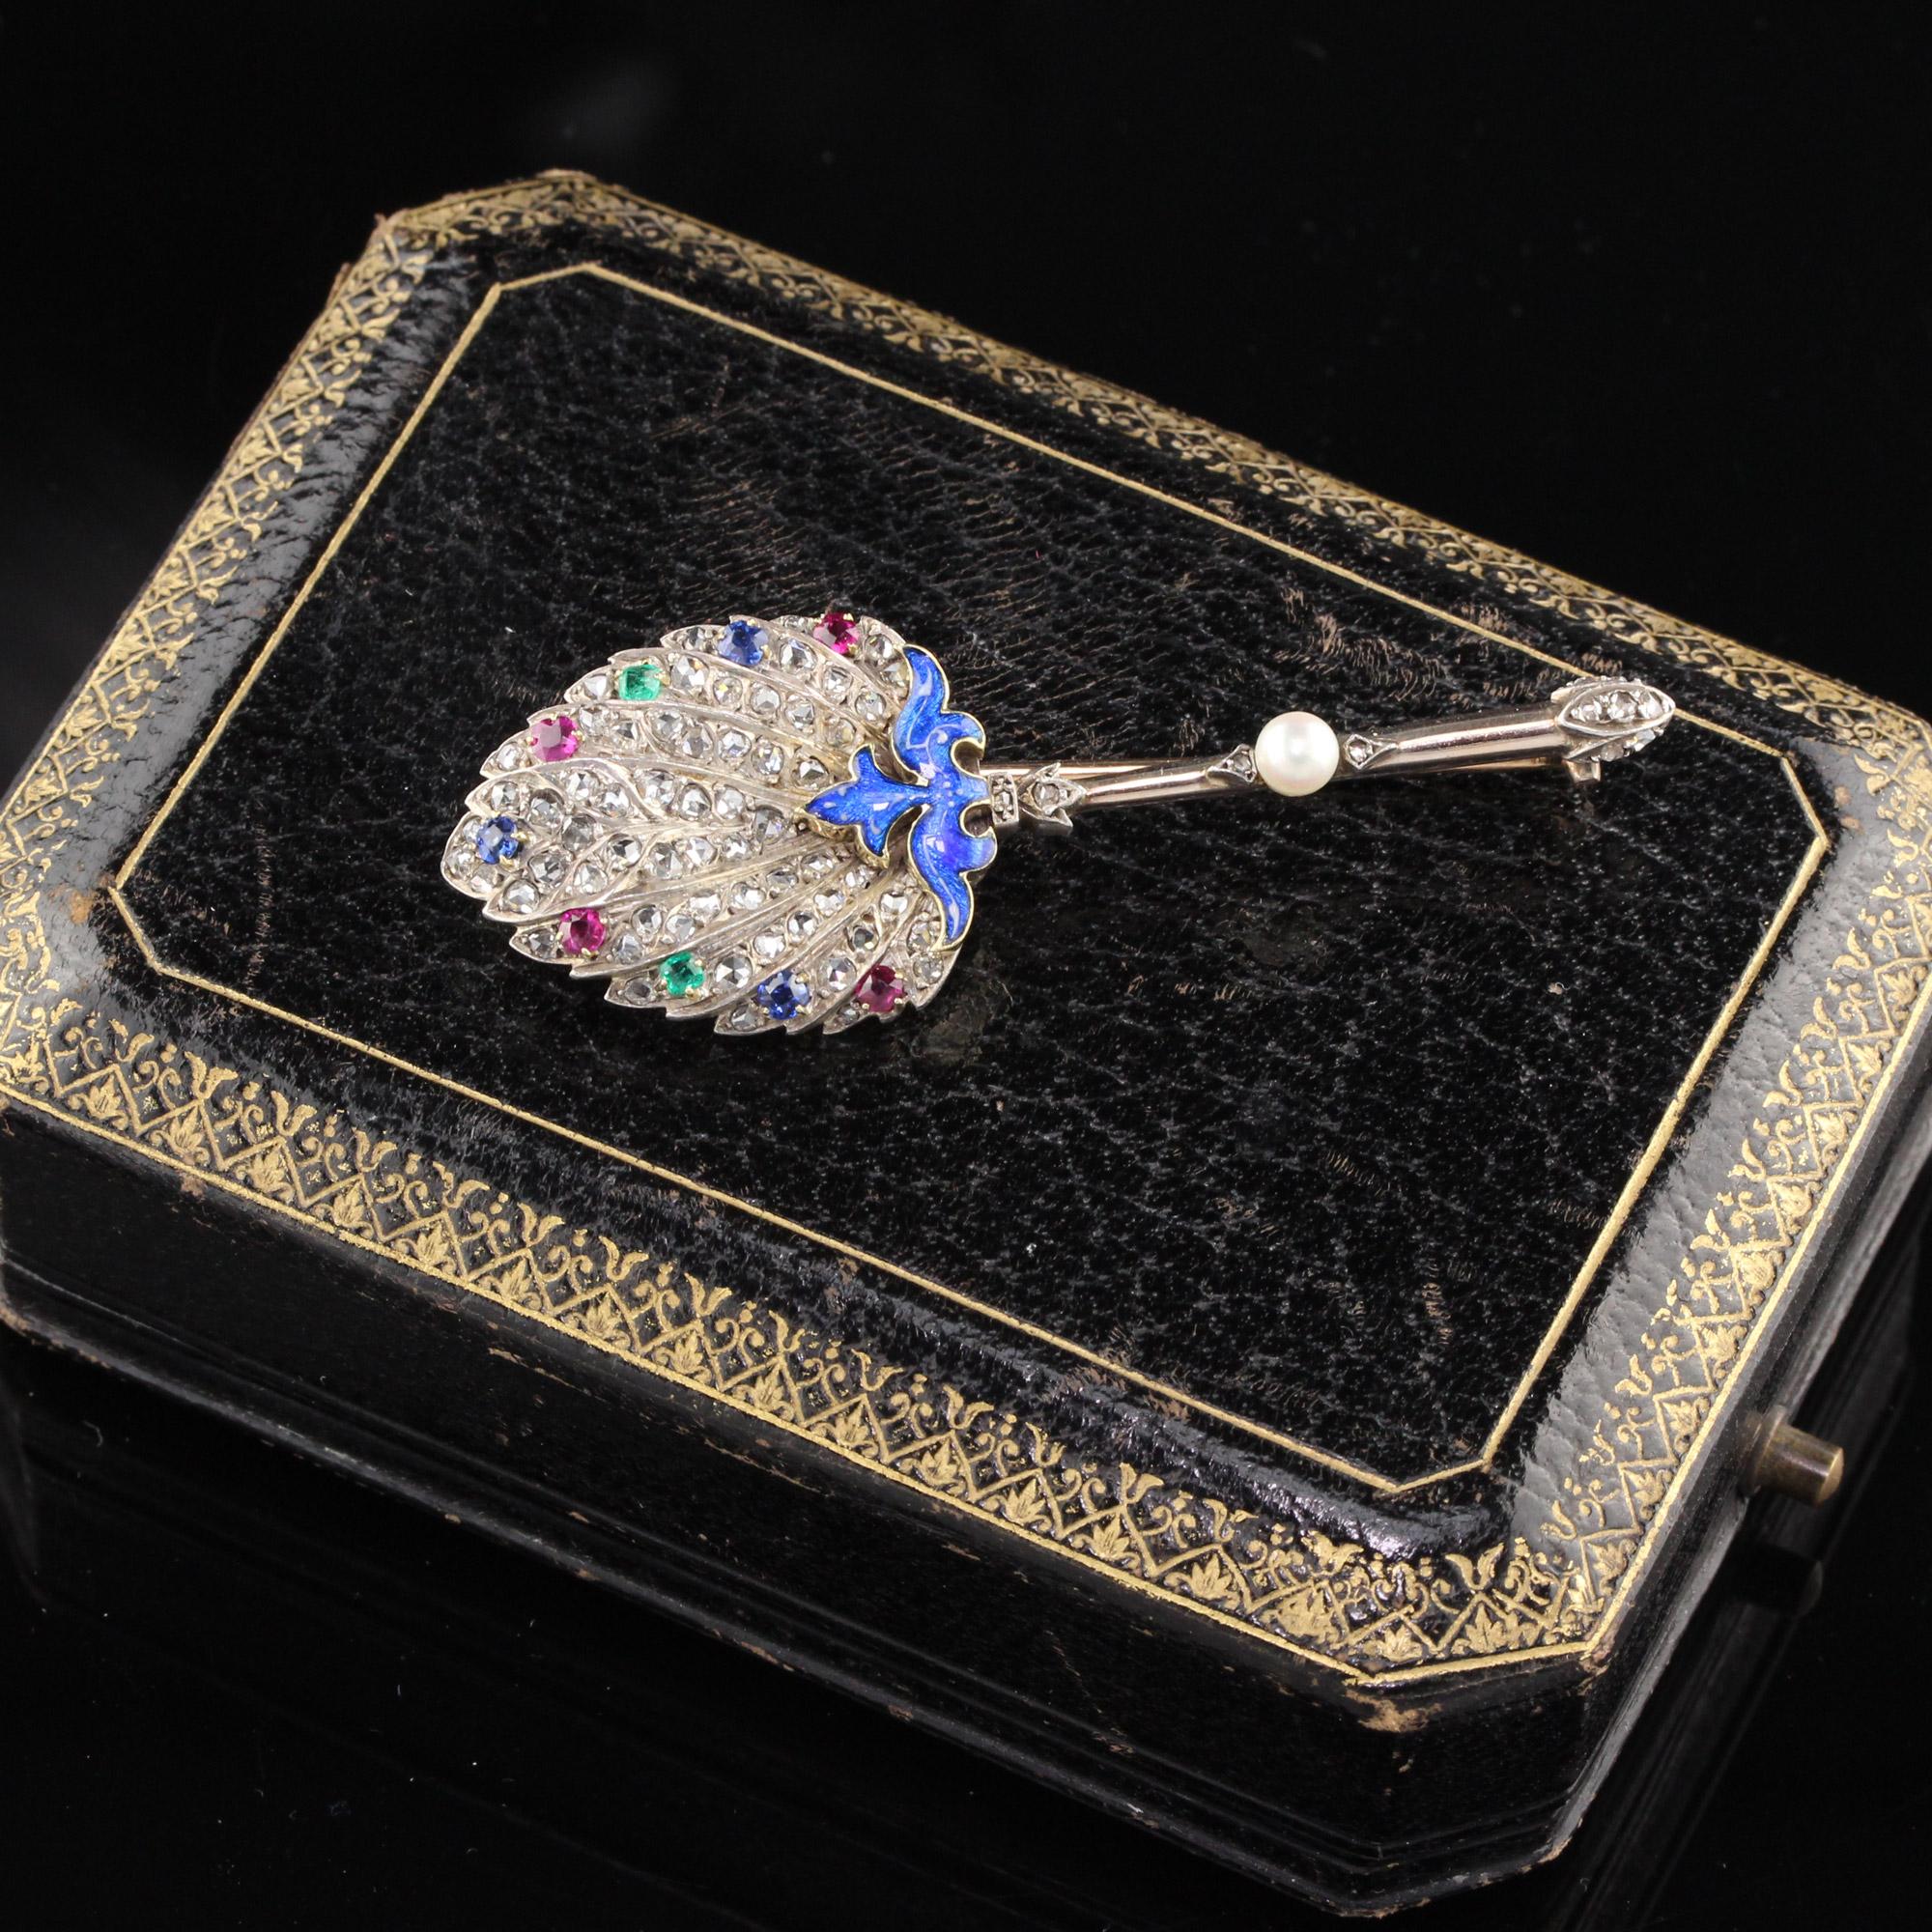 Magnificent Victorian 'feather' Brooch with chunky rose cut diamonds, rubies, emeralds, sapphires, royal blue enamel, and a natural pearl. The pin has French hallmarks and is fit for royalty! This is a unisex piece and would look incredible on a